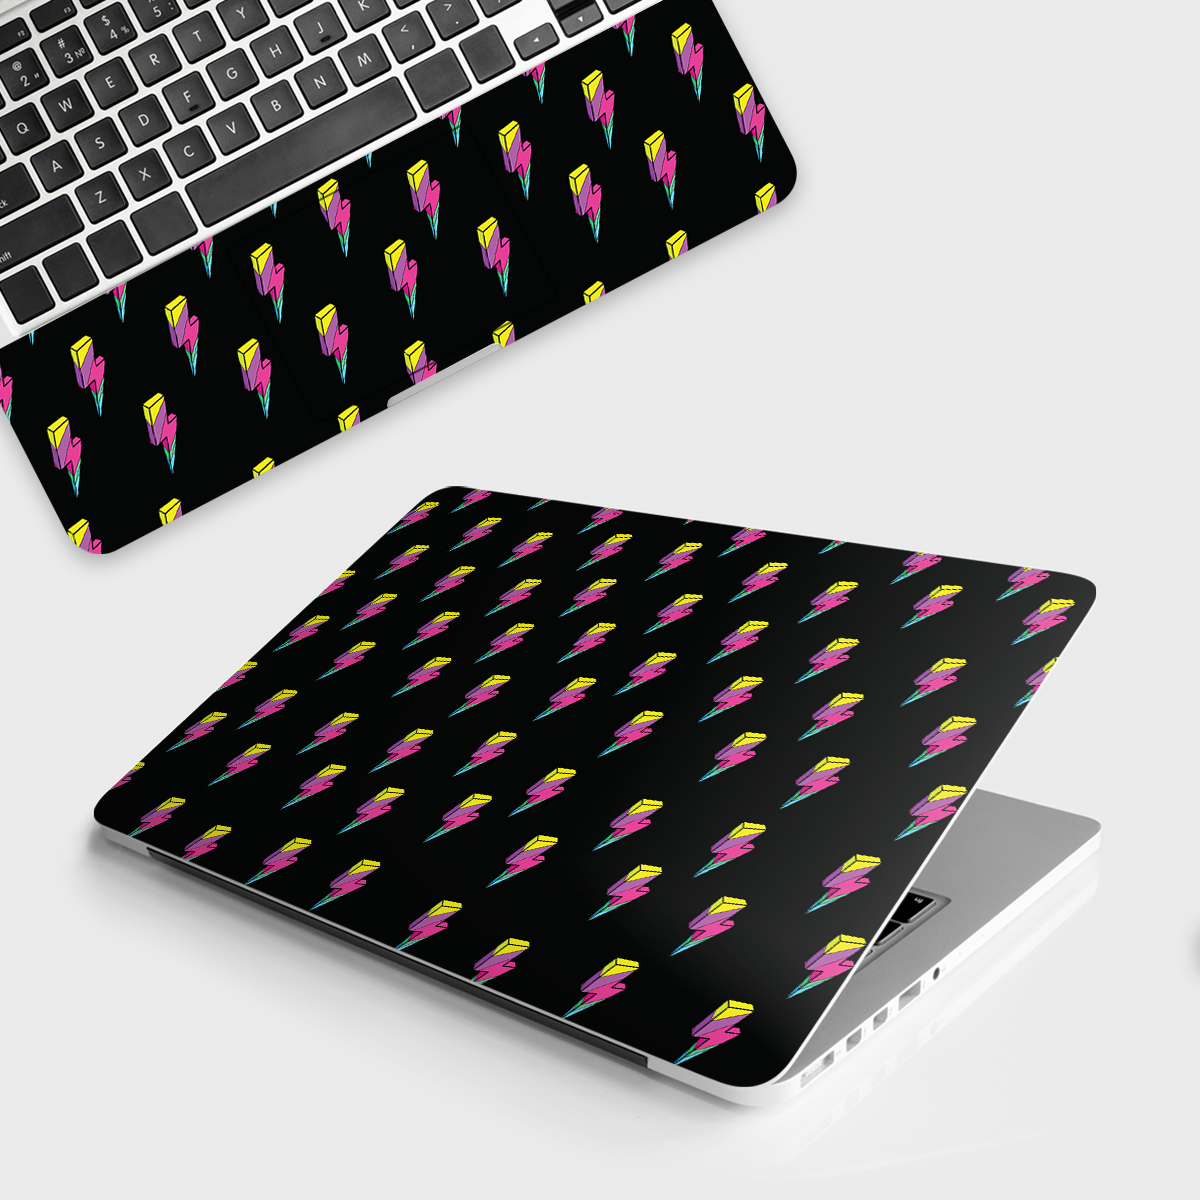 Fomo Store Laptop Skins Abstract Colorful Lightning Bolts